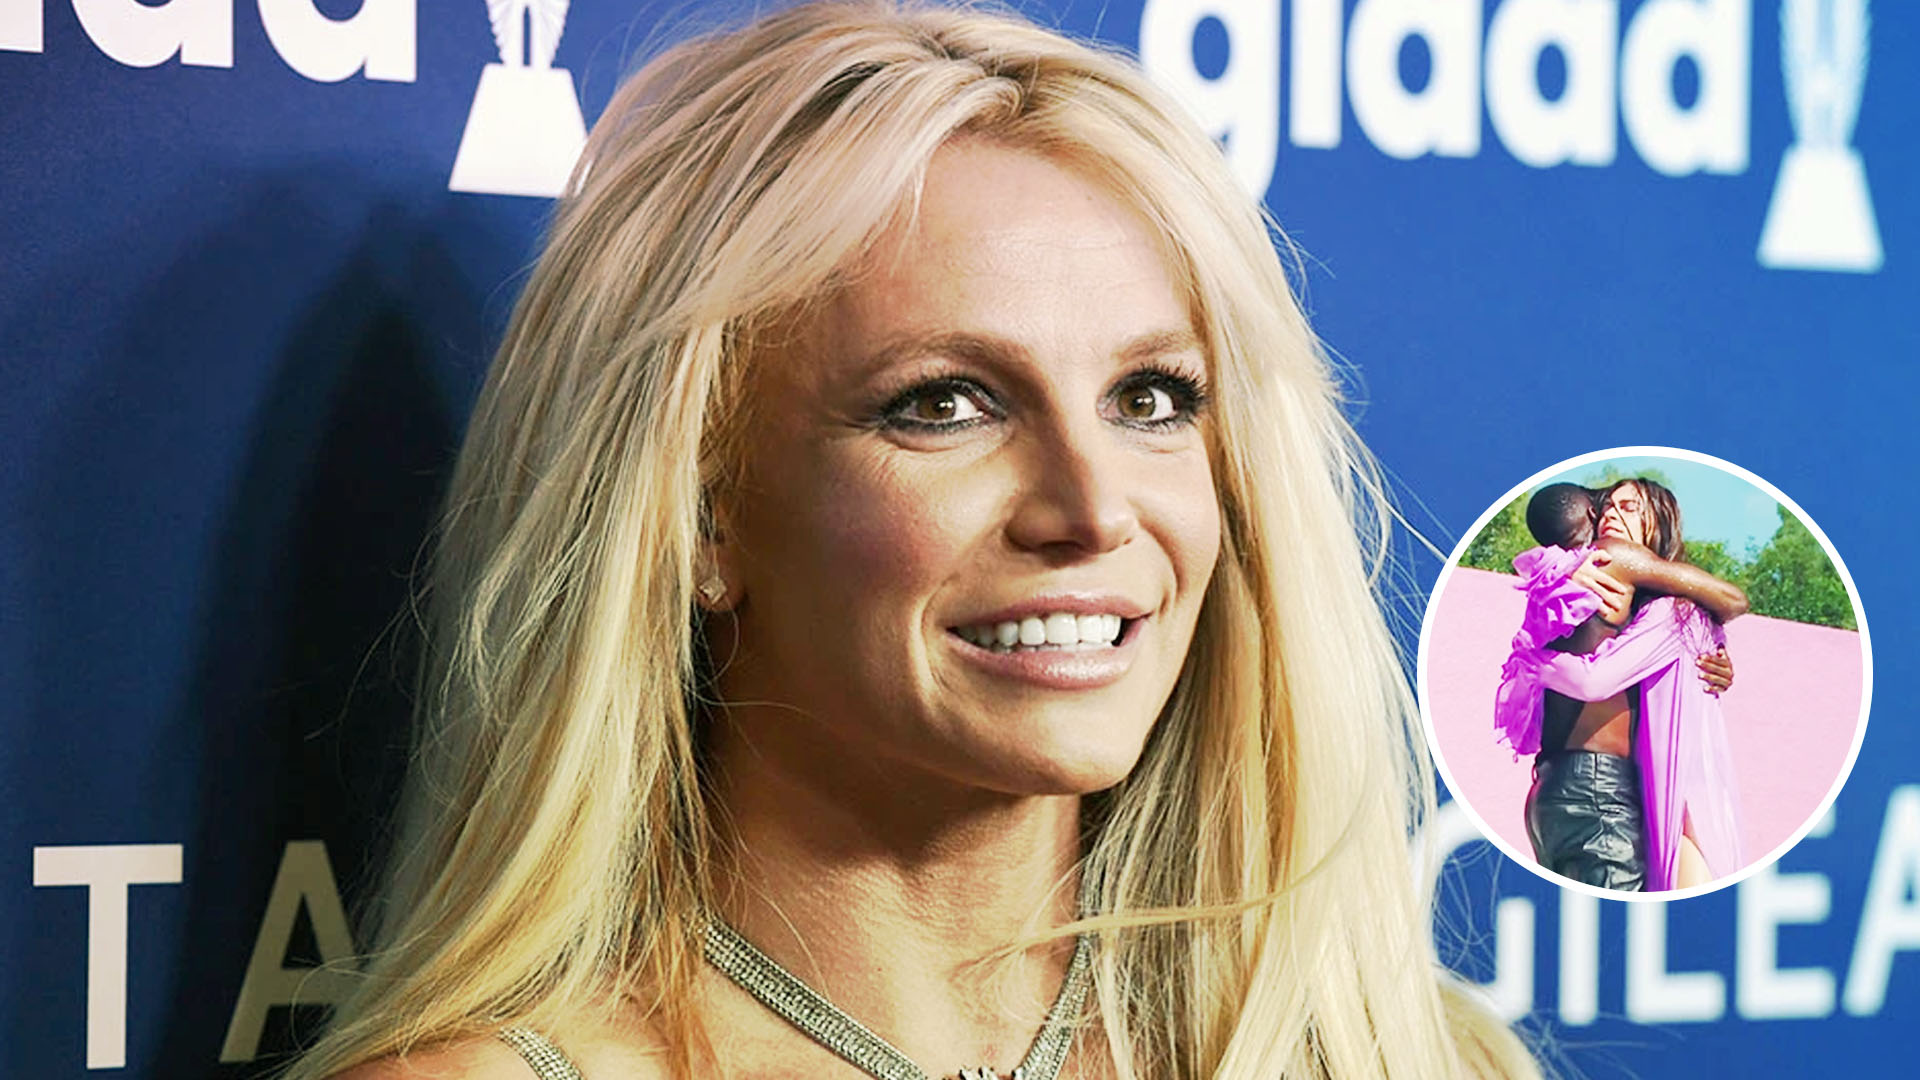 Why Britney Spears Did Not Appear in Hold Me Closer?